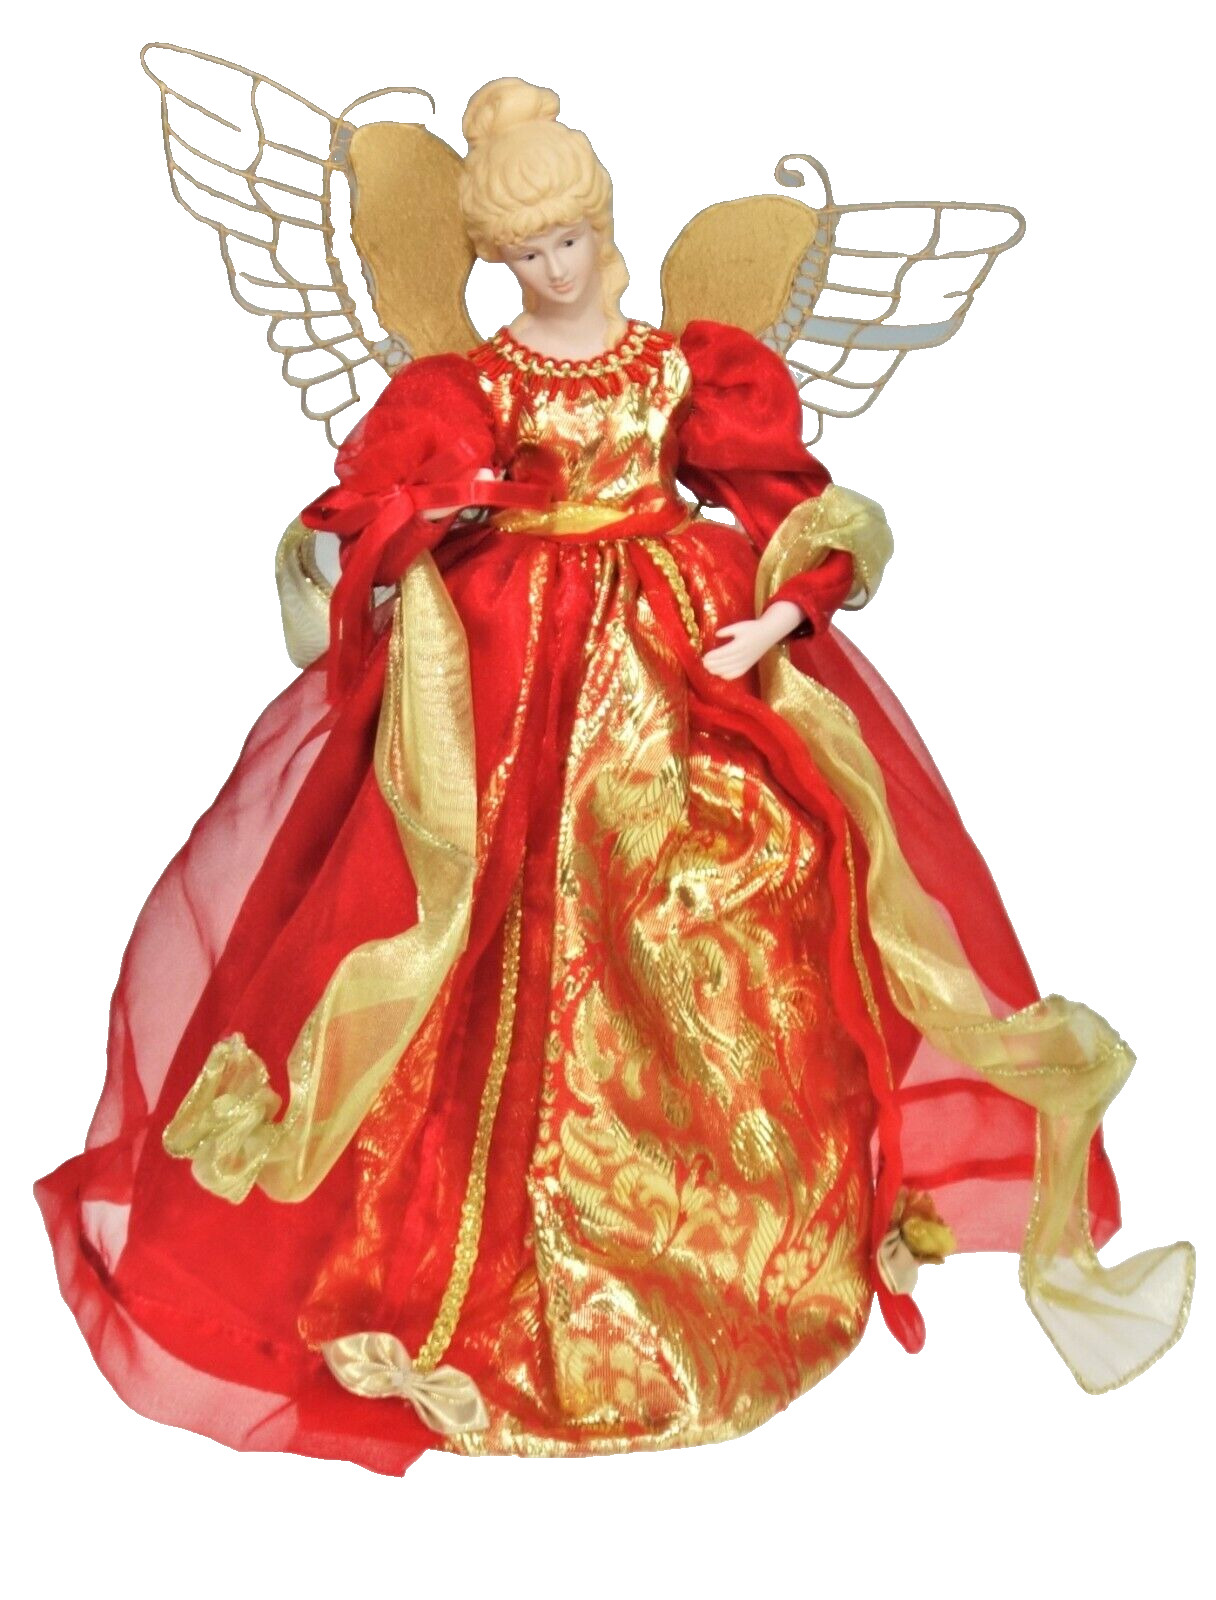 16” Angel Large Tree Topper Angelic Christmas Centerpiece Holiday Decor